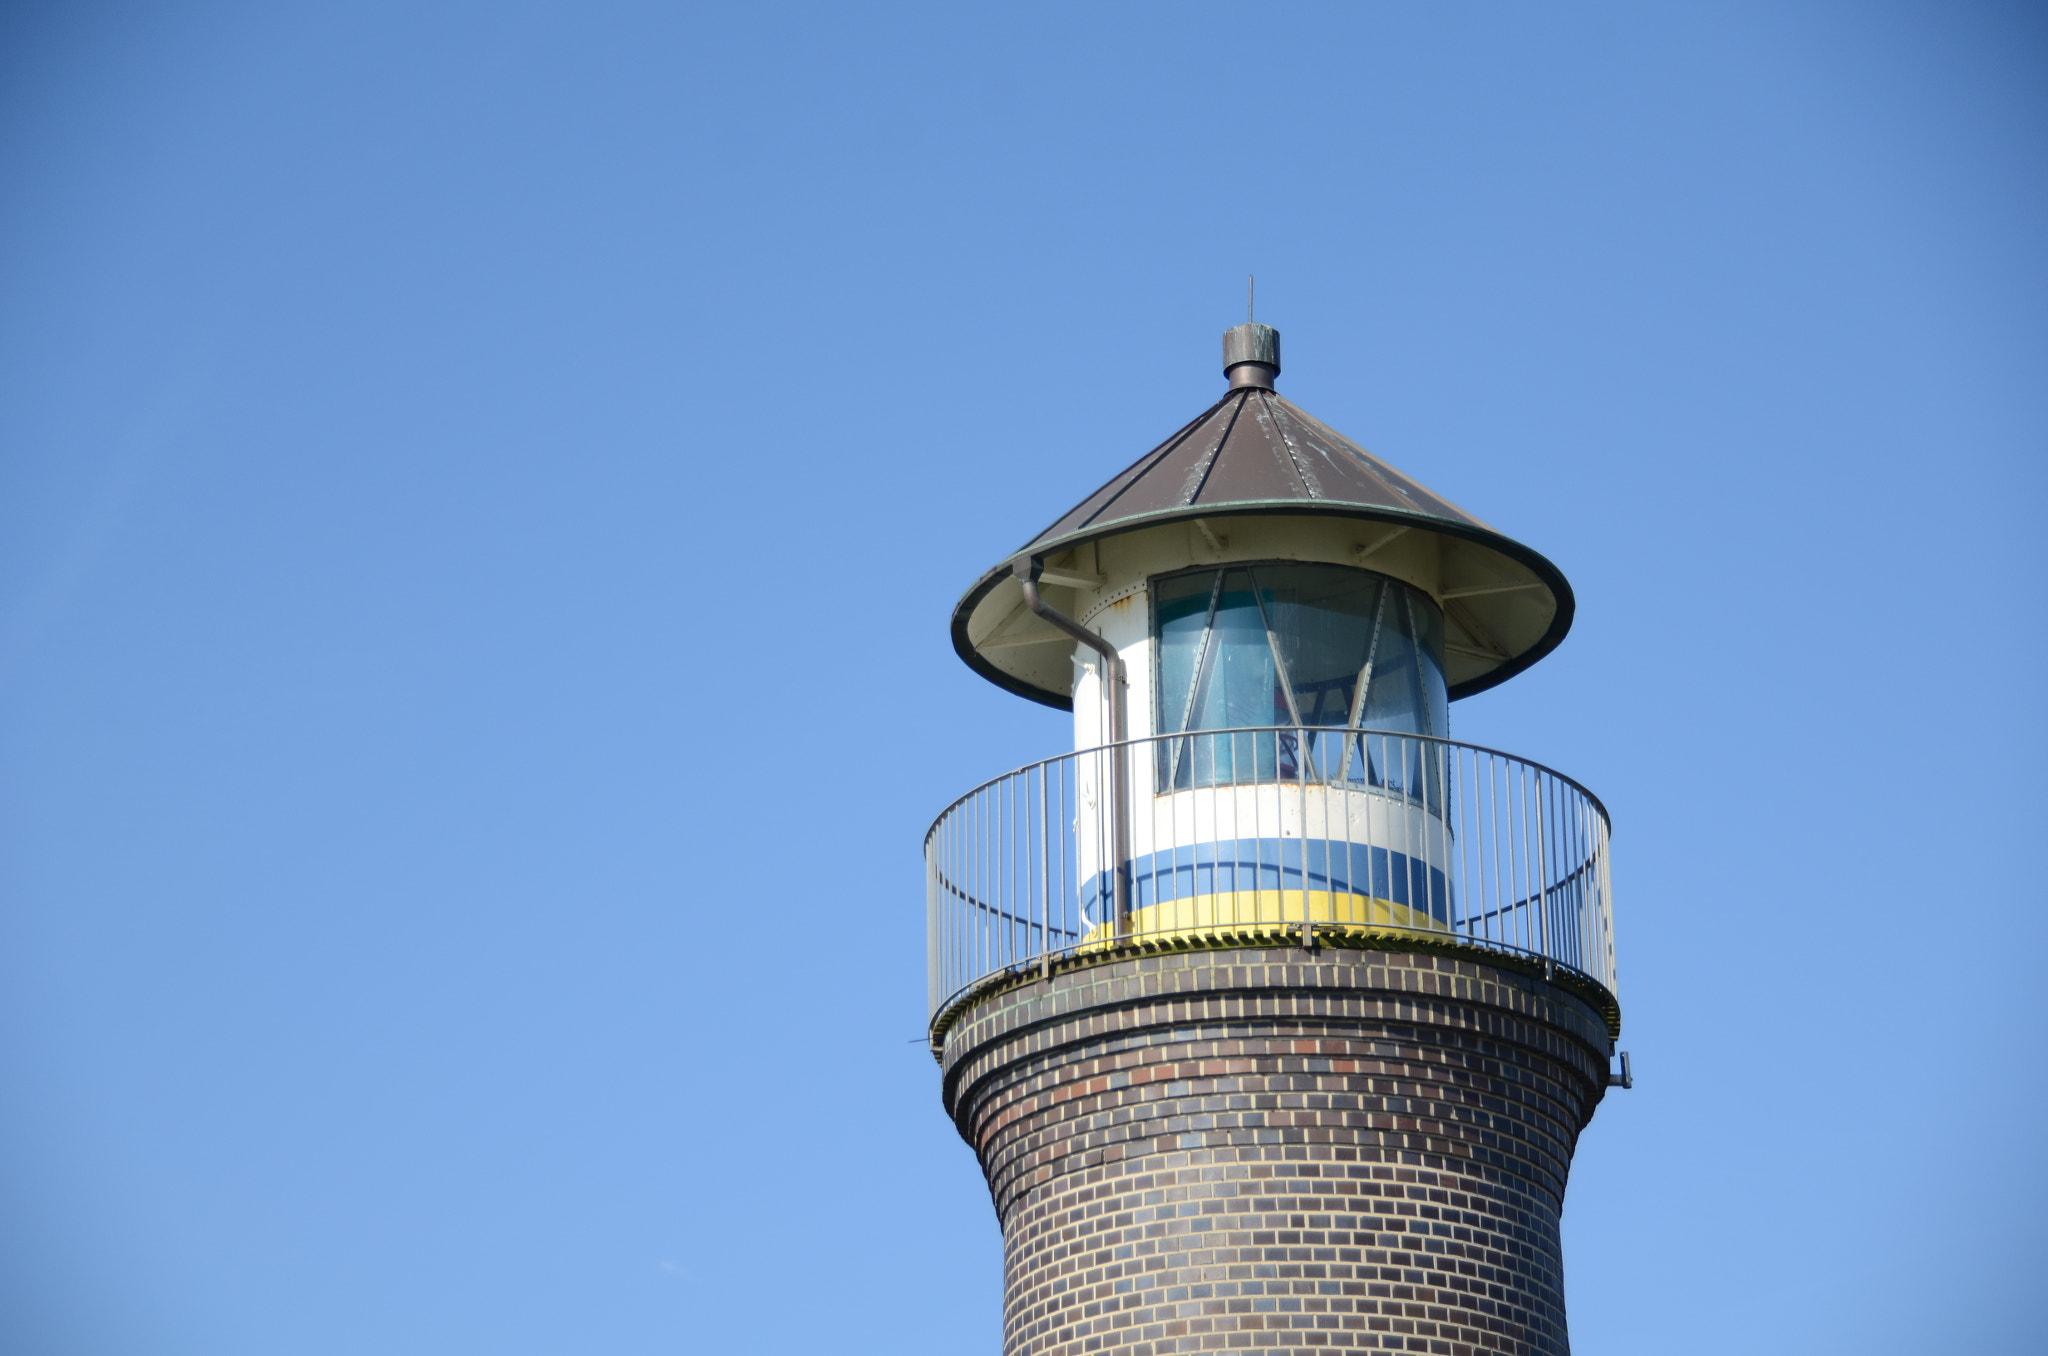 Nikon D7000 + Sigma 18-250mm F3.5-6.3 DC Macro OS HSM sample photo. Lighthouse in the blue photography